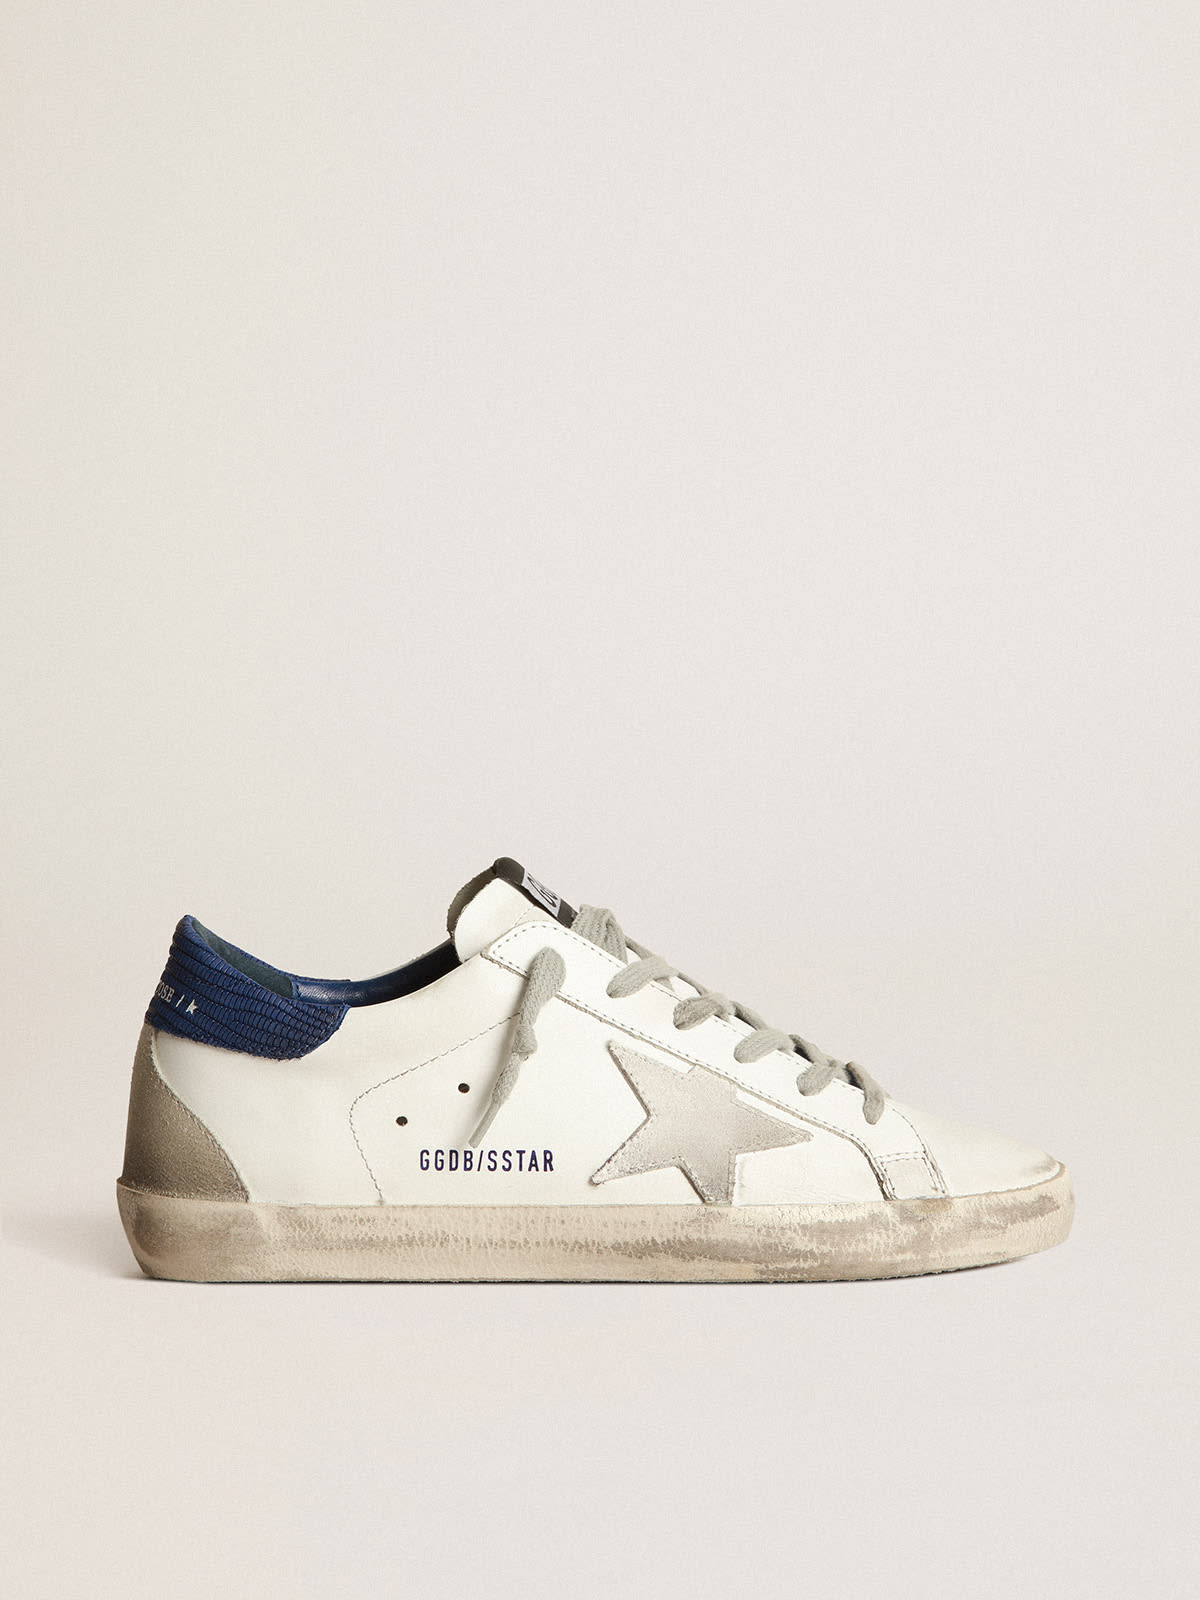 Golden Goose - Super-Star sneakers with off-white suede star and blue lizard-print nubuck heel tab in 